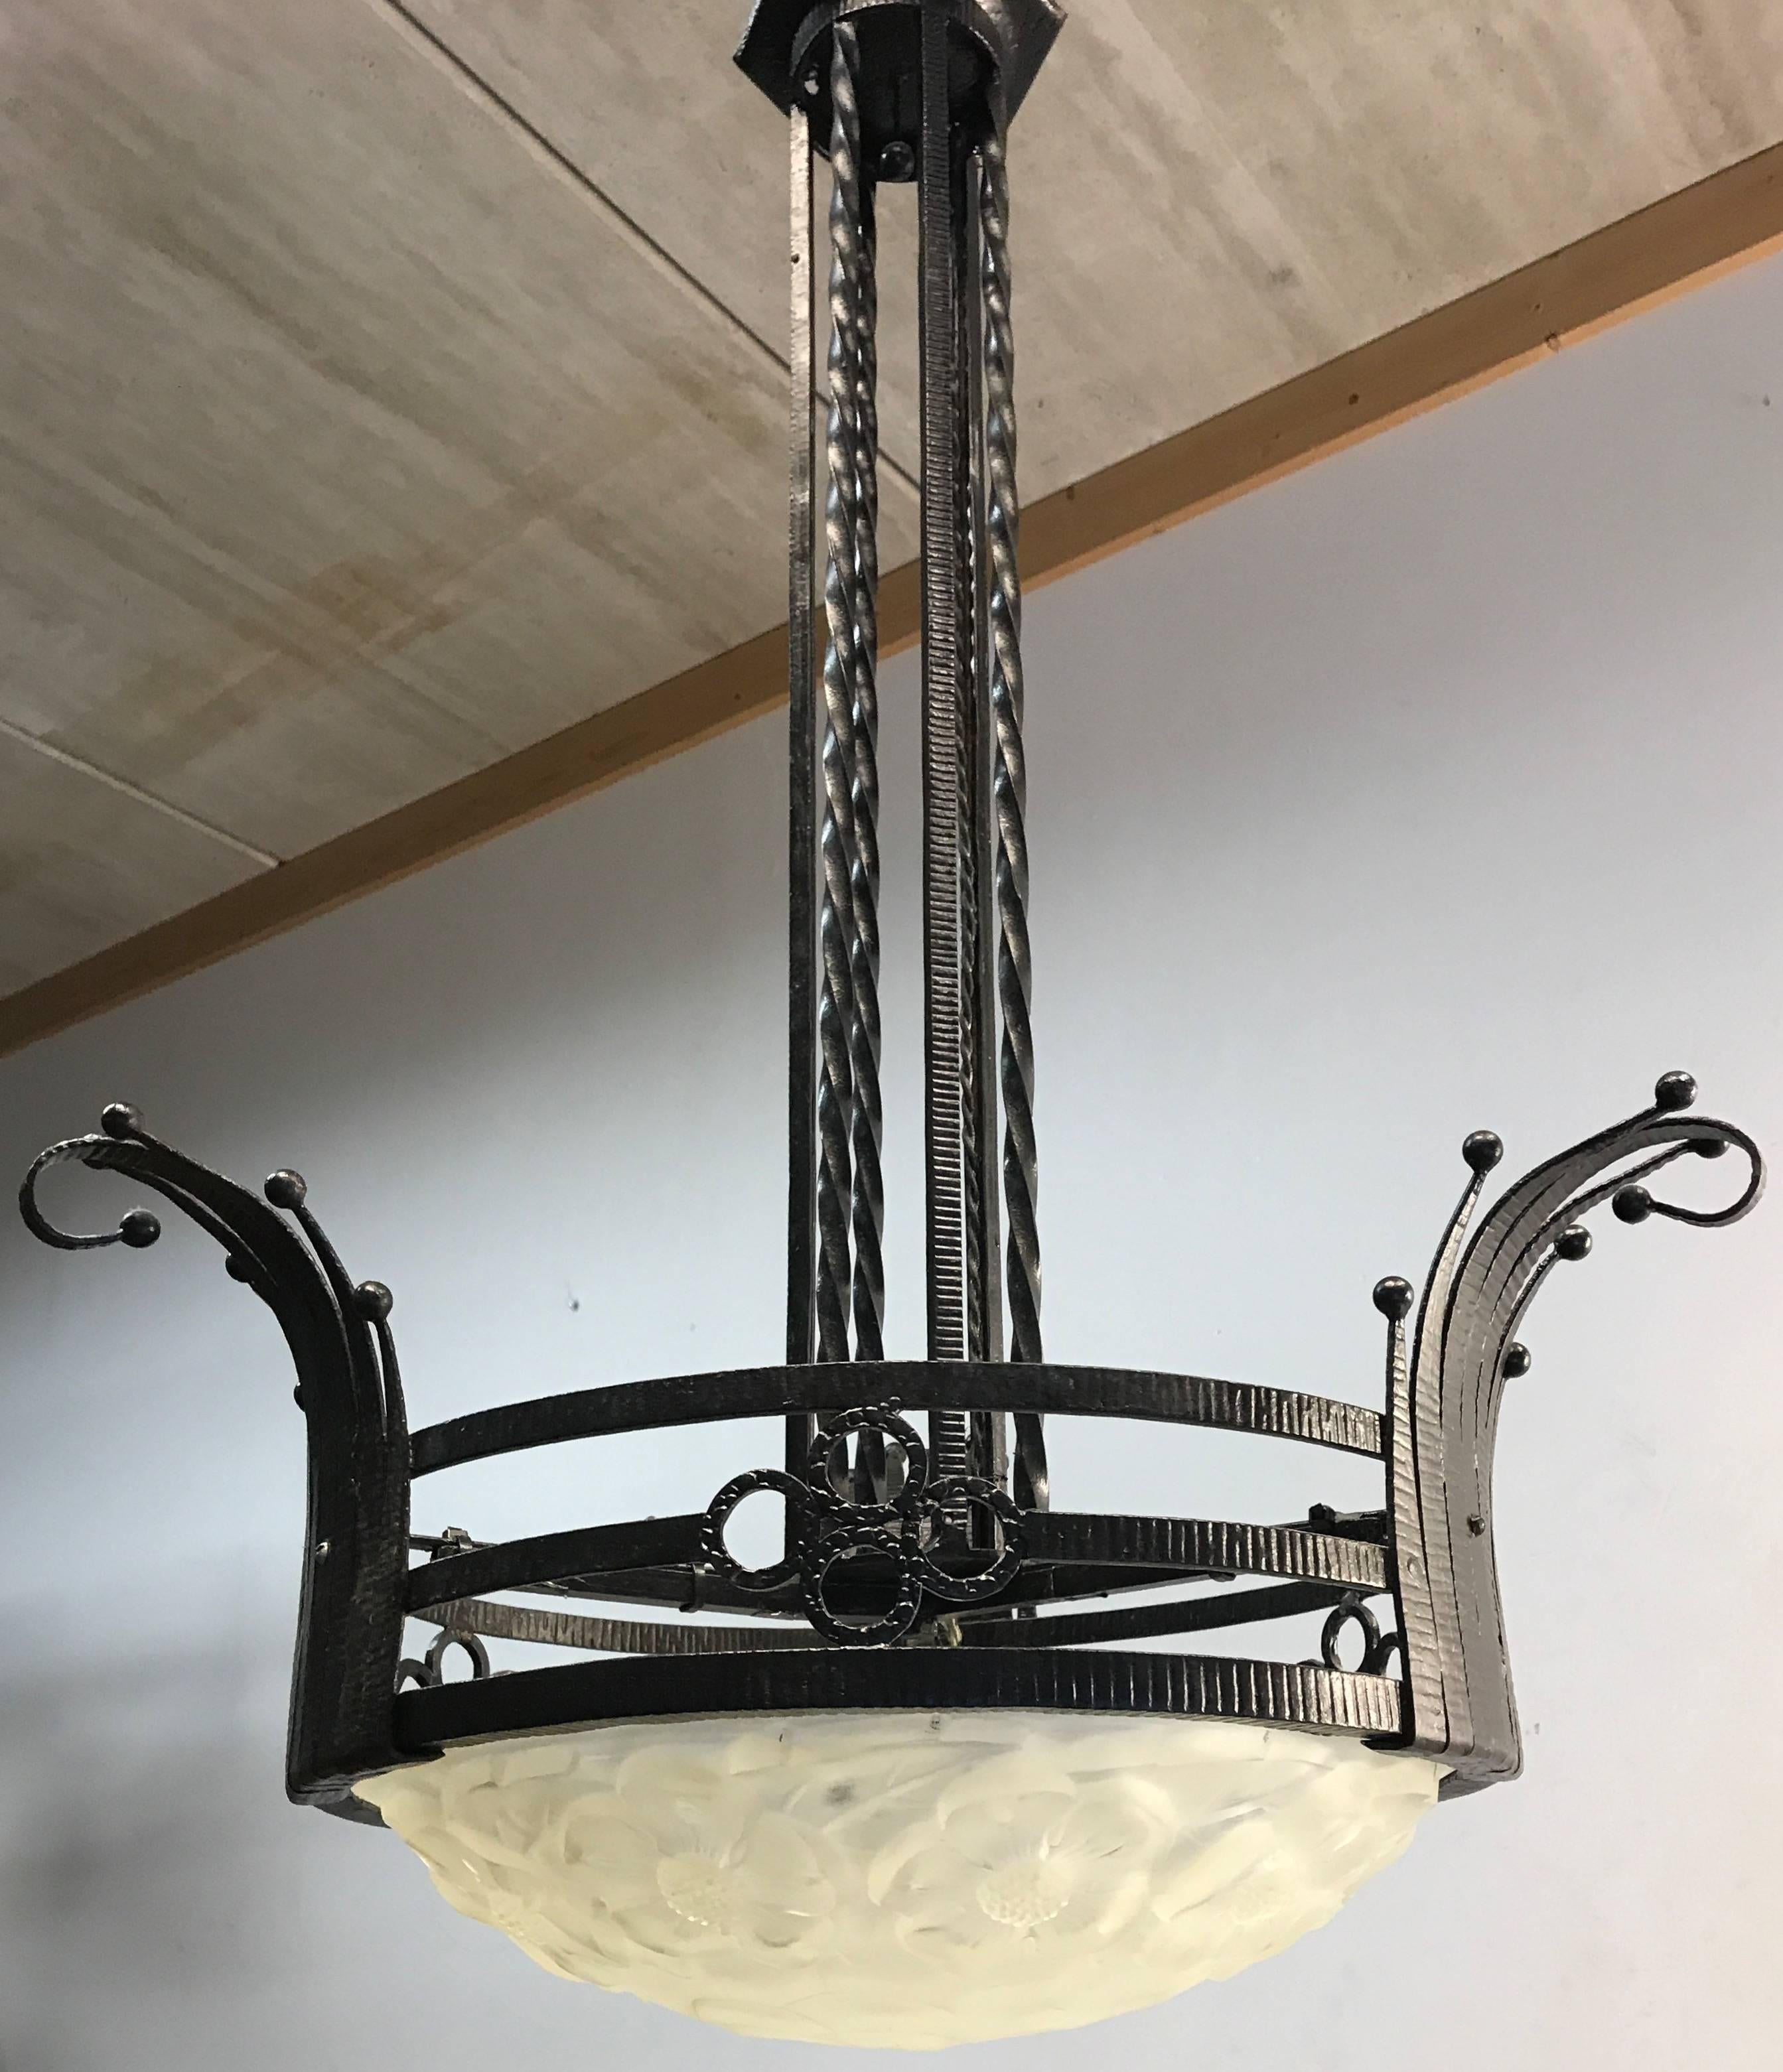 Rare and magnificent Art Deco Pendant by Degué of France.

If you have a home from the 1920s or 1930s or in the style of this period than this handcrafted work of lighting art could be perfect for you. The beautifully designed and hand-forged